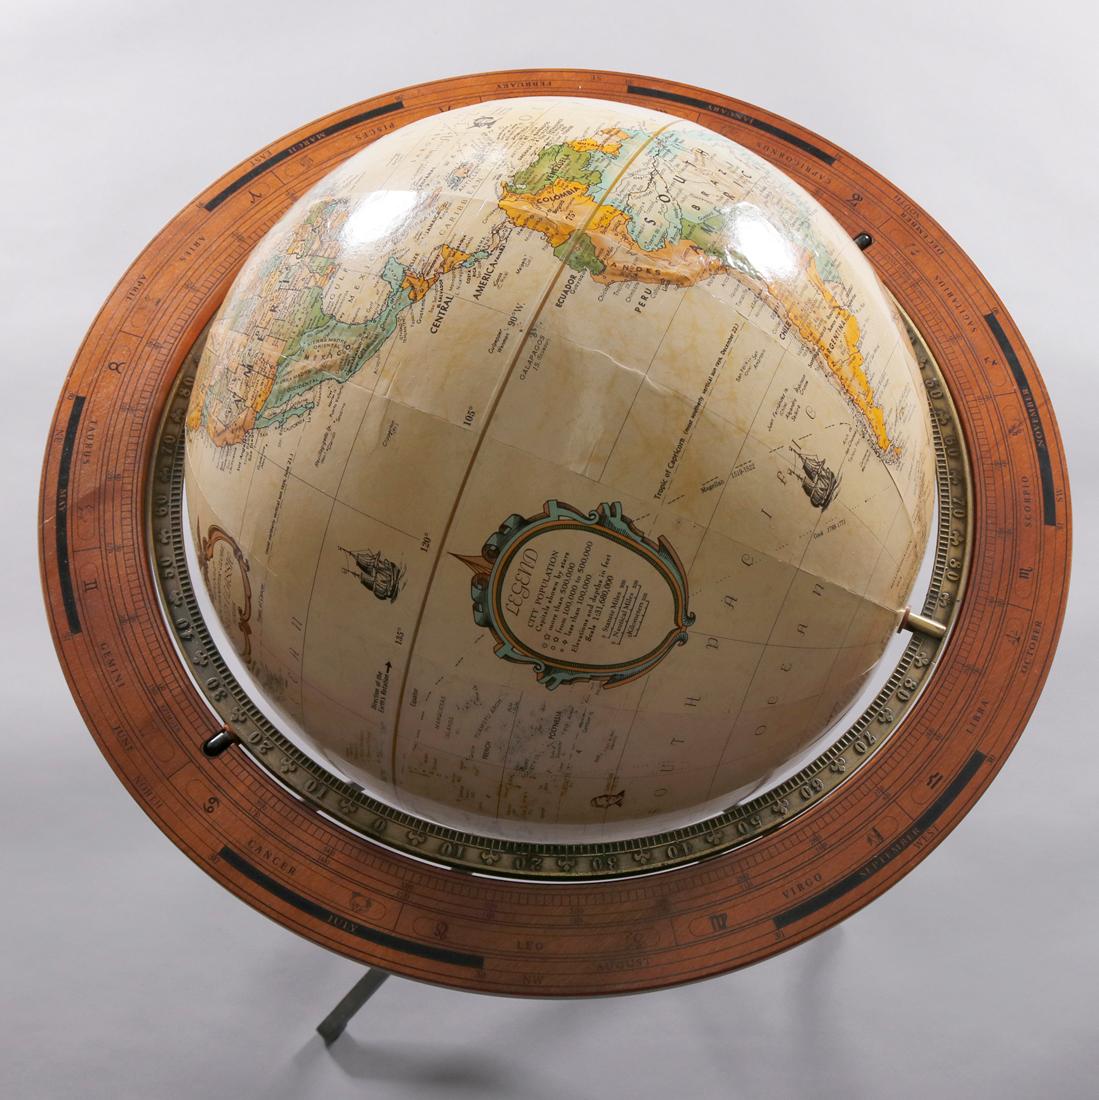 A vintage English style Old World Globe on cast metal tripod stand having wood frame, 20th Century

Measures: 40